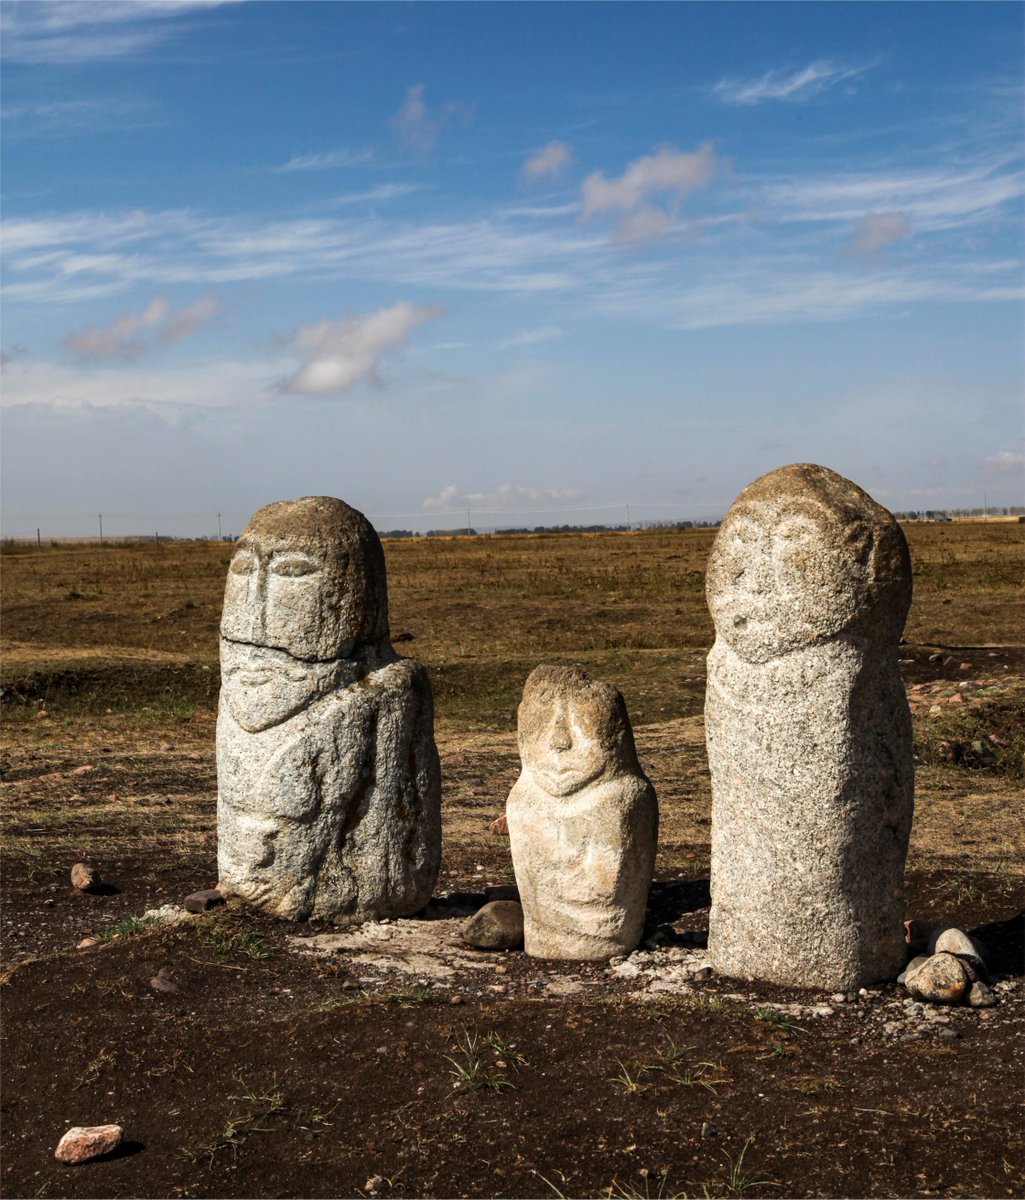 The Stone Figures face the direction of the rising sun, gazing towards the distant sky, witnessing the historical chapters unfolding on the grasslands.
#historicalsites #xinjiang #thisisxinjiang #xinjiangtravel #xinjiangculturalrelics